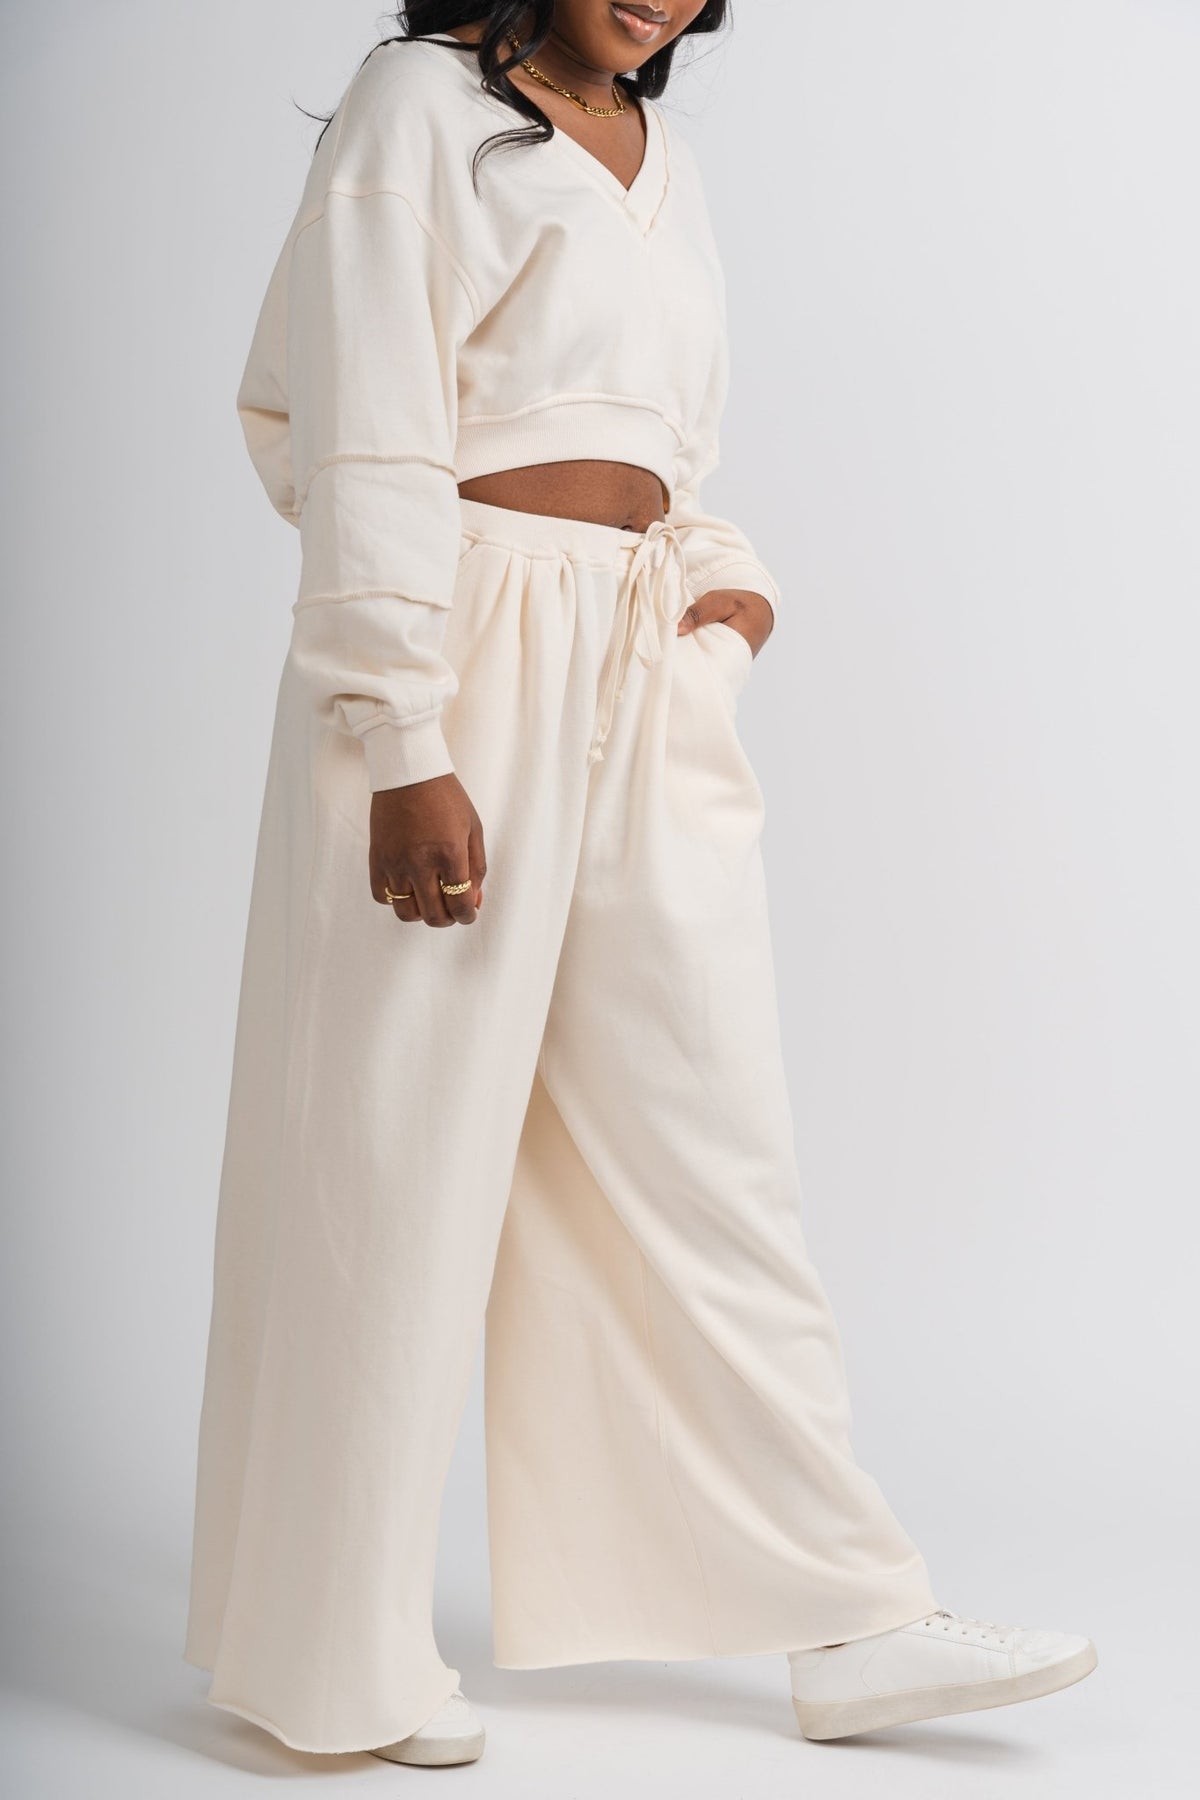 Wide leg sweatpants cream - Trendy sweatpants - Cute Loungewear Collection at Lush Fashion Lounge Boutique in Oklahoma City